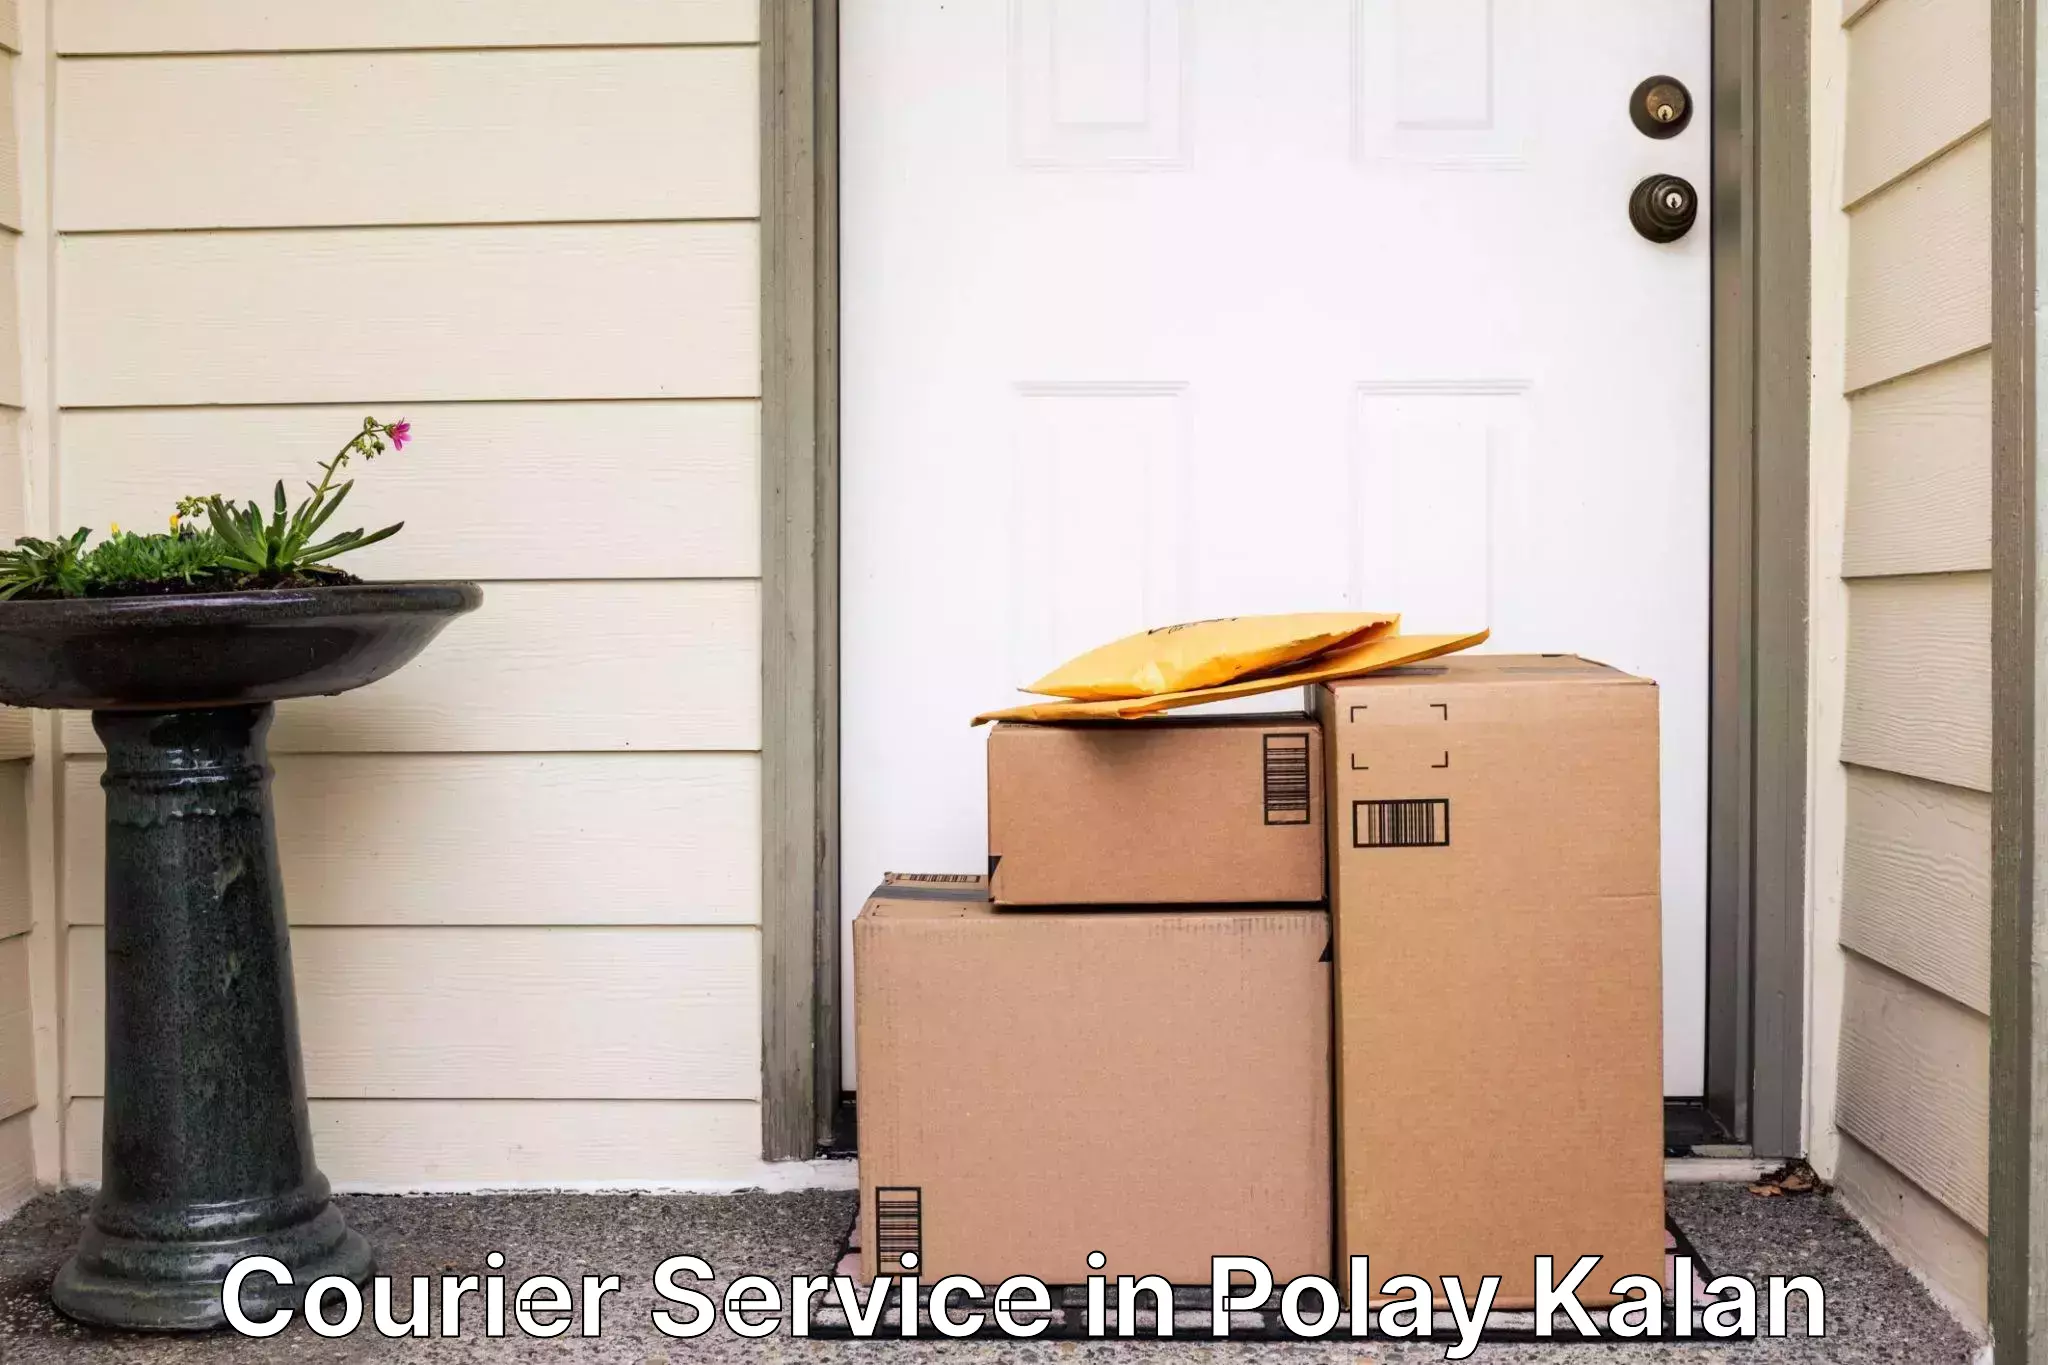 State-of-the-art courier technology in Polay Kalan